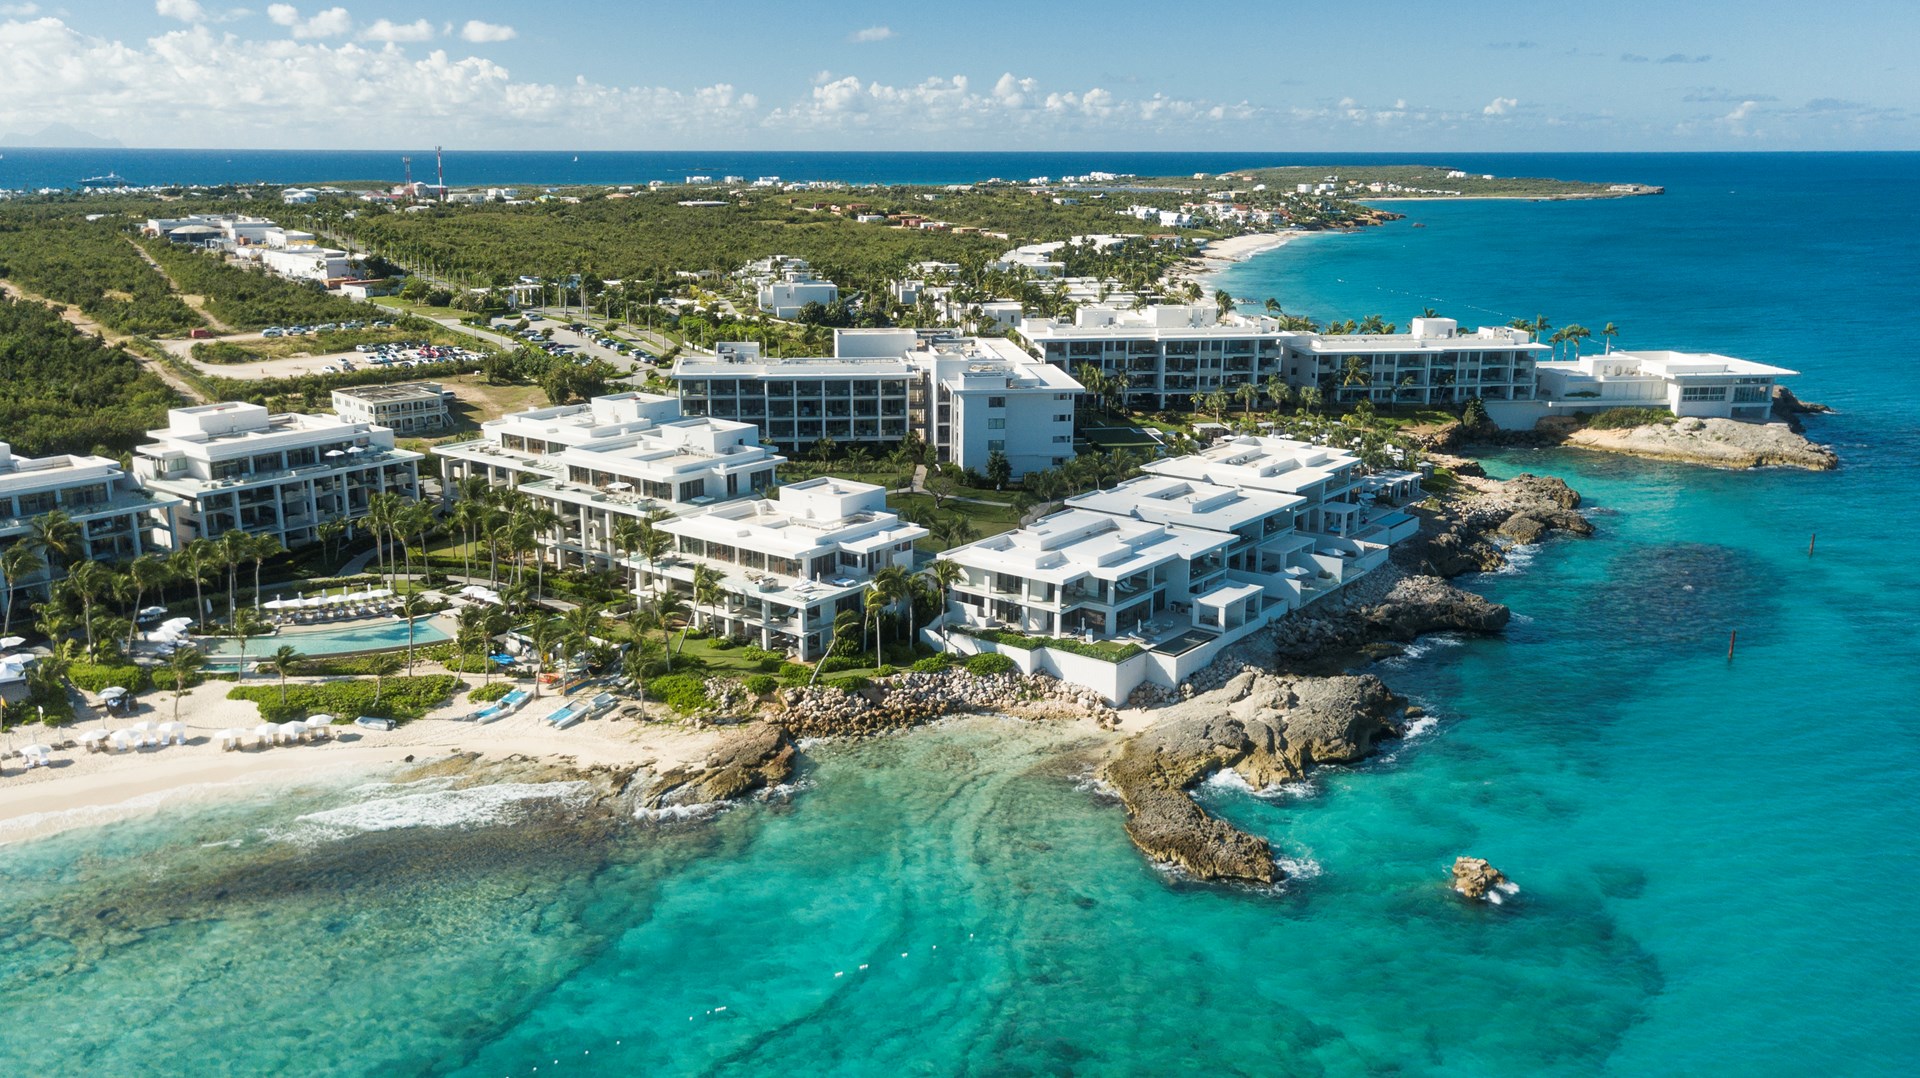 Media release: Dart acquires Four Seasons Resort and Residences Anguilla